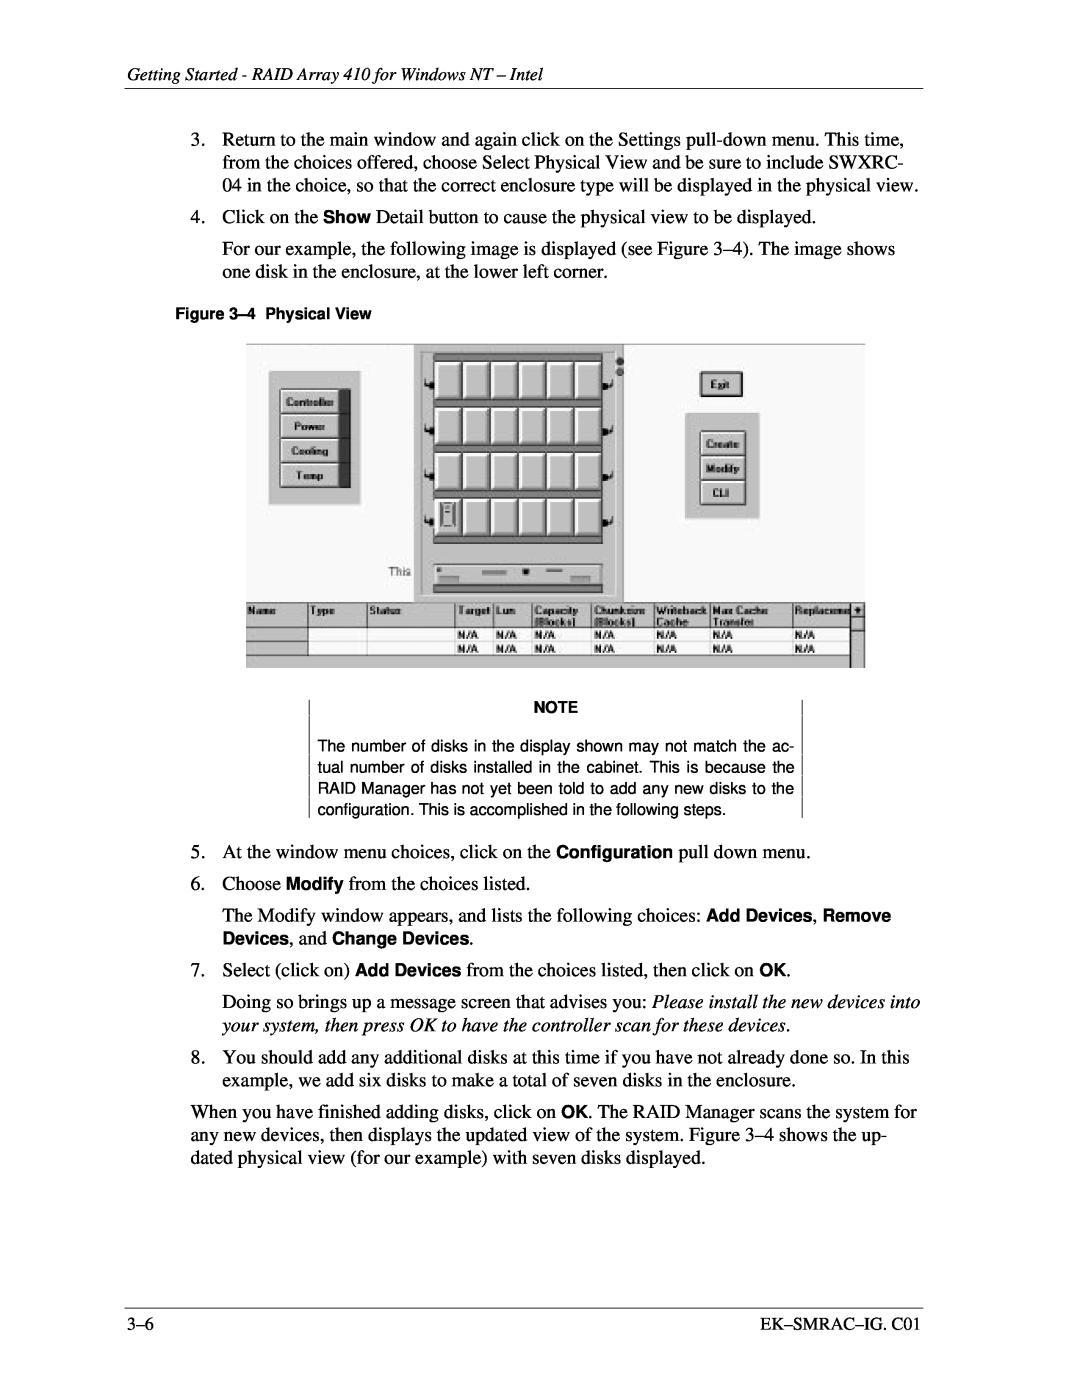 Intel 410 manual Choose Modify from the choices listed 